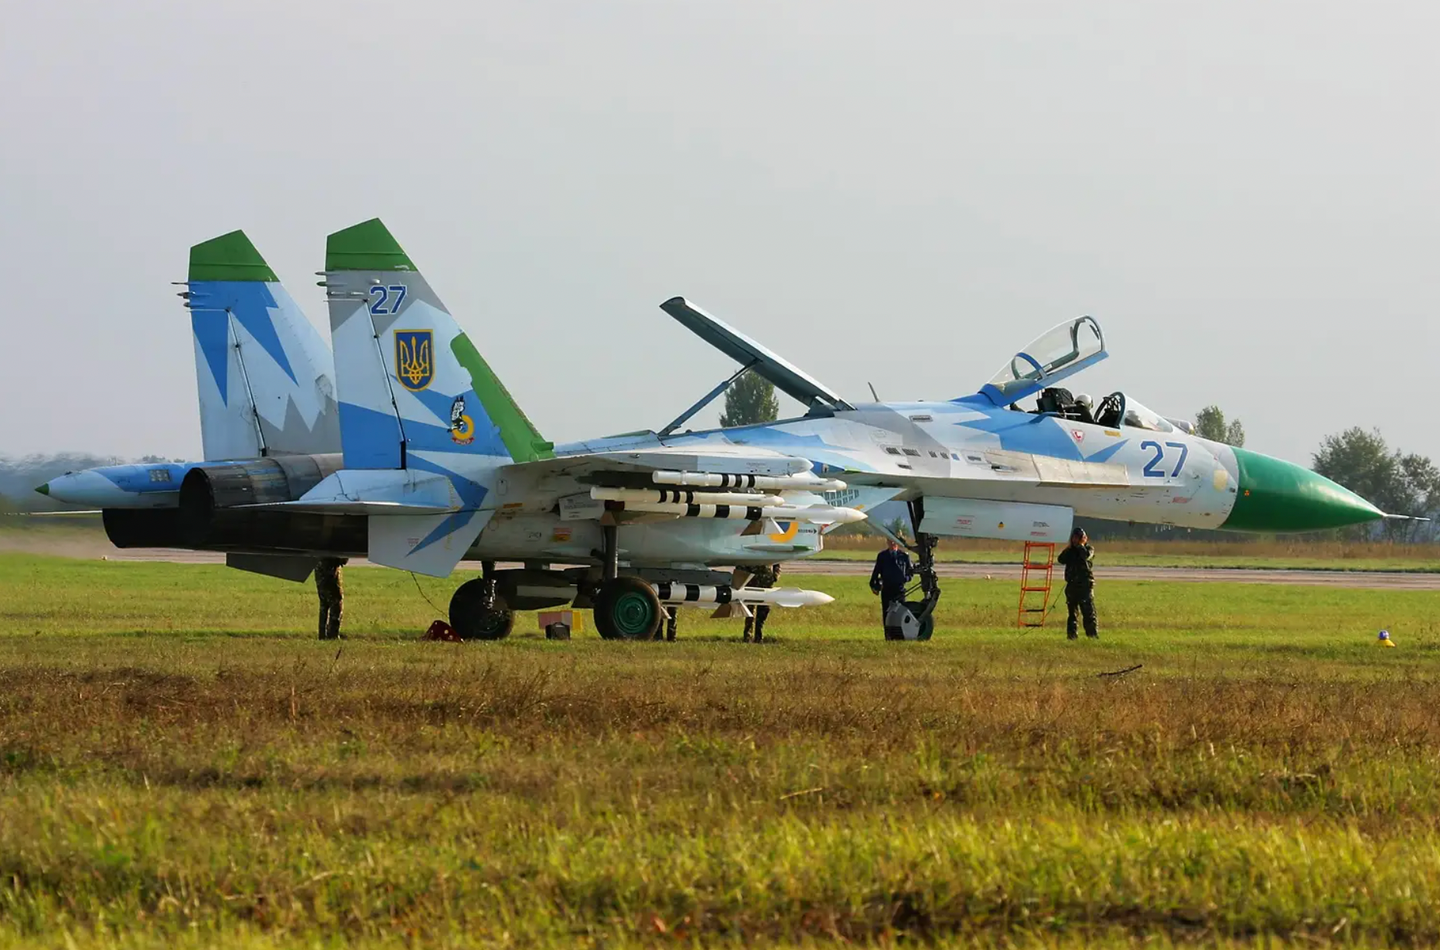 A Ukrainian Air Force Su-27 with a green radome and tailfin caps at Kyiv-Gostomel Airport in September 2008.&nbsp;<em>Oleg V. Belyakov/Wikimedia Commons</em>